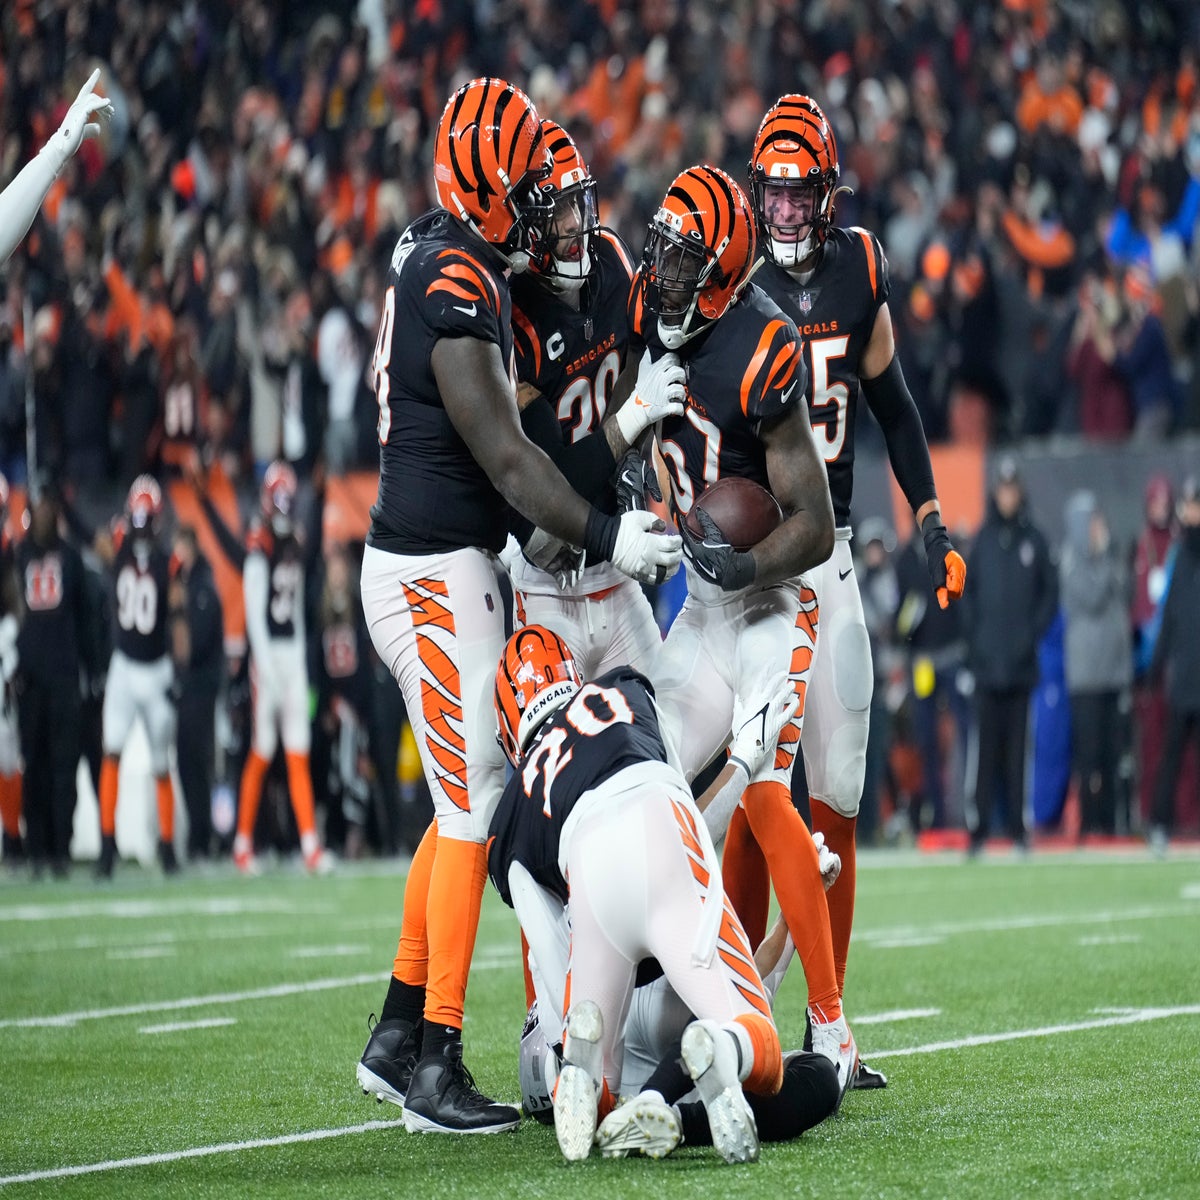 Cincinnati Bengals-Raiders playoff game will end a drought